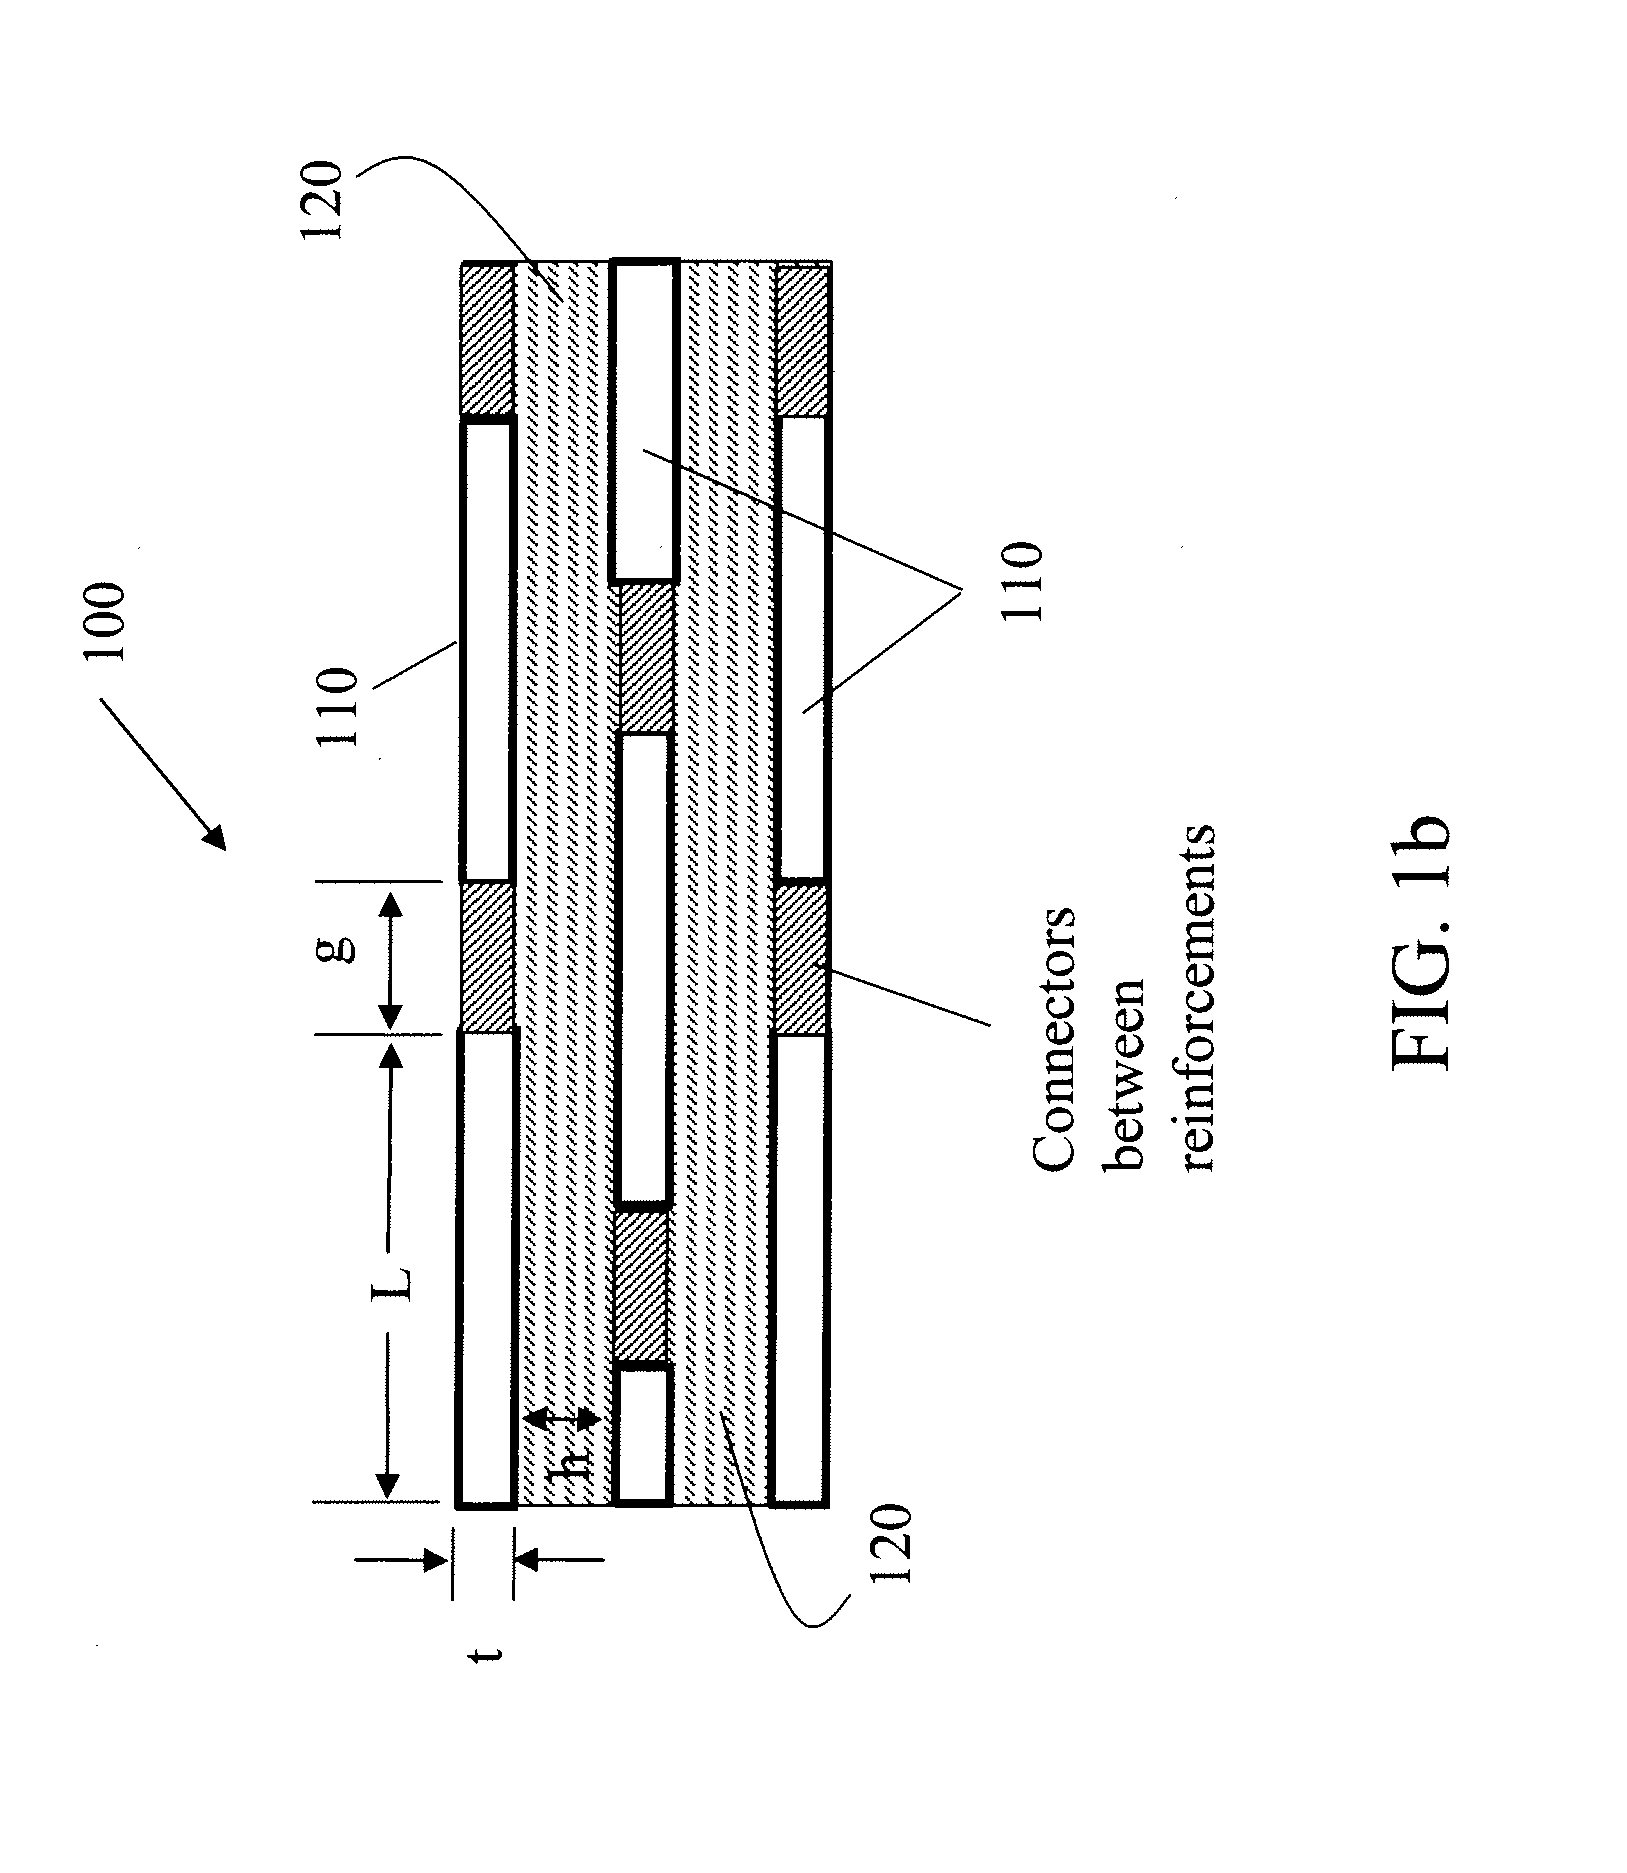 Three-dimensional (3D) reinforcement control in composite materials